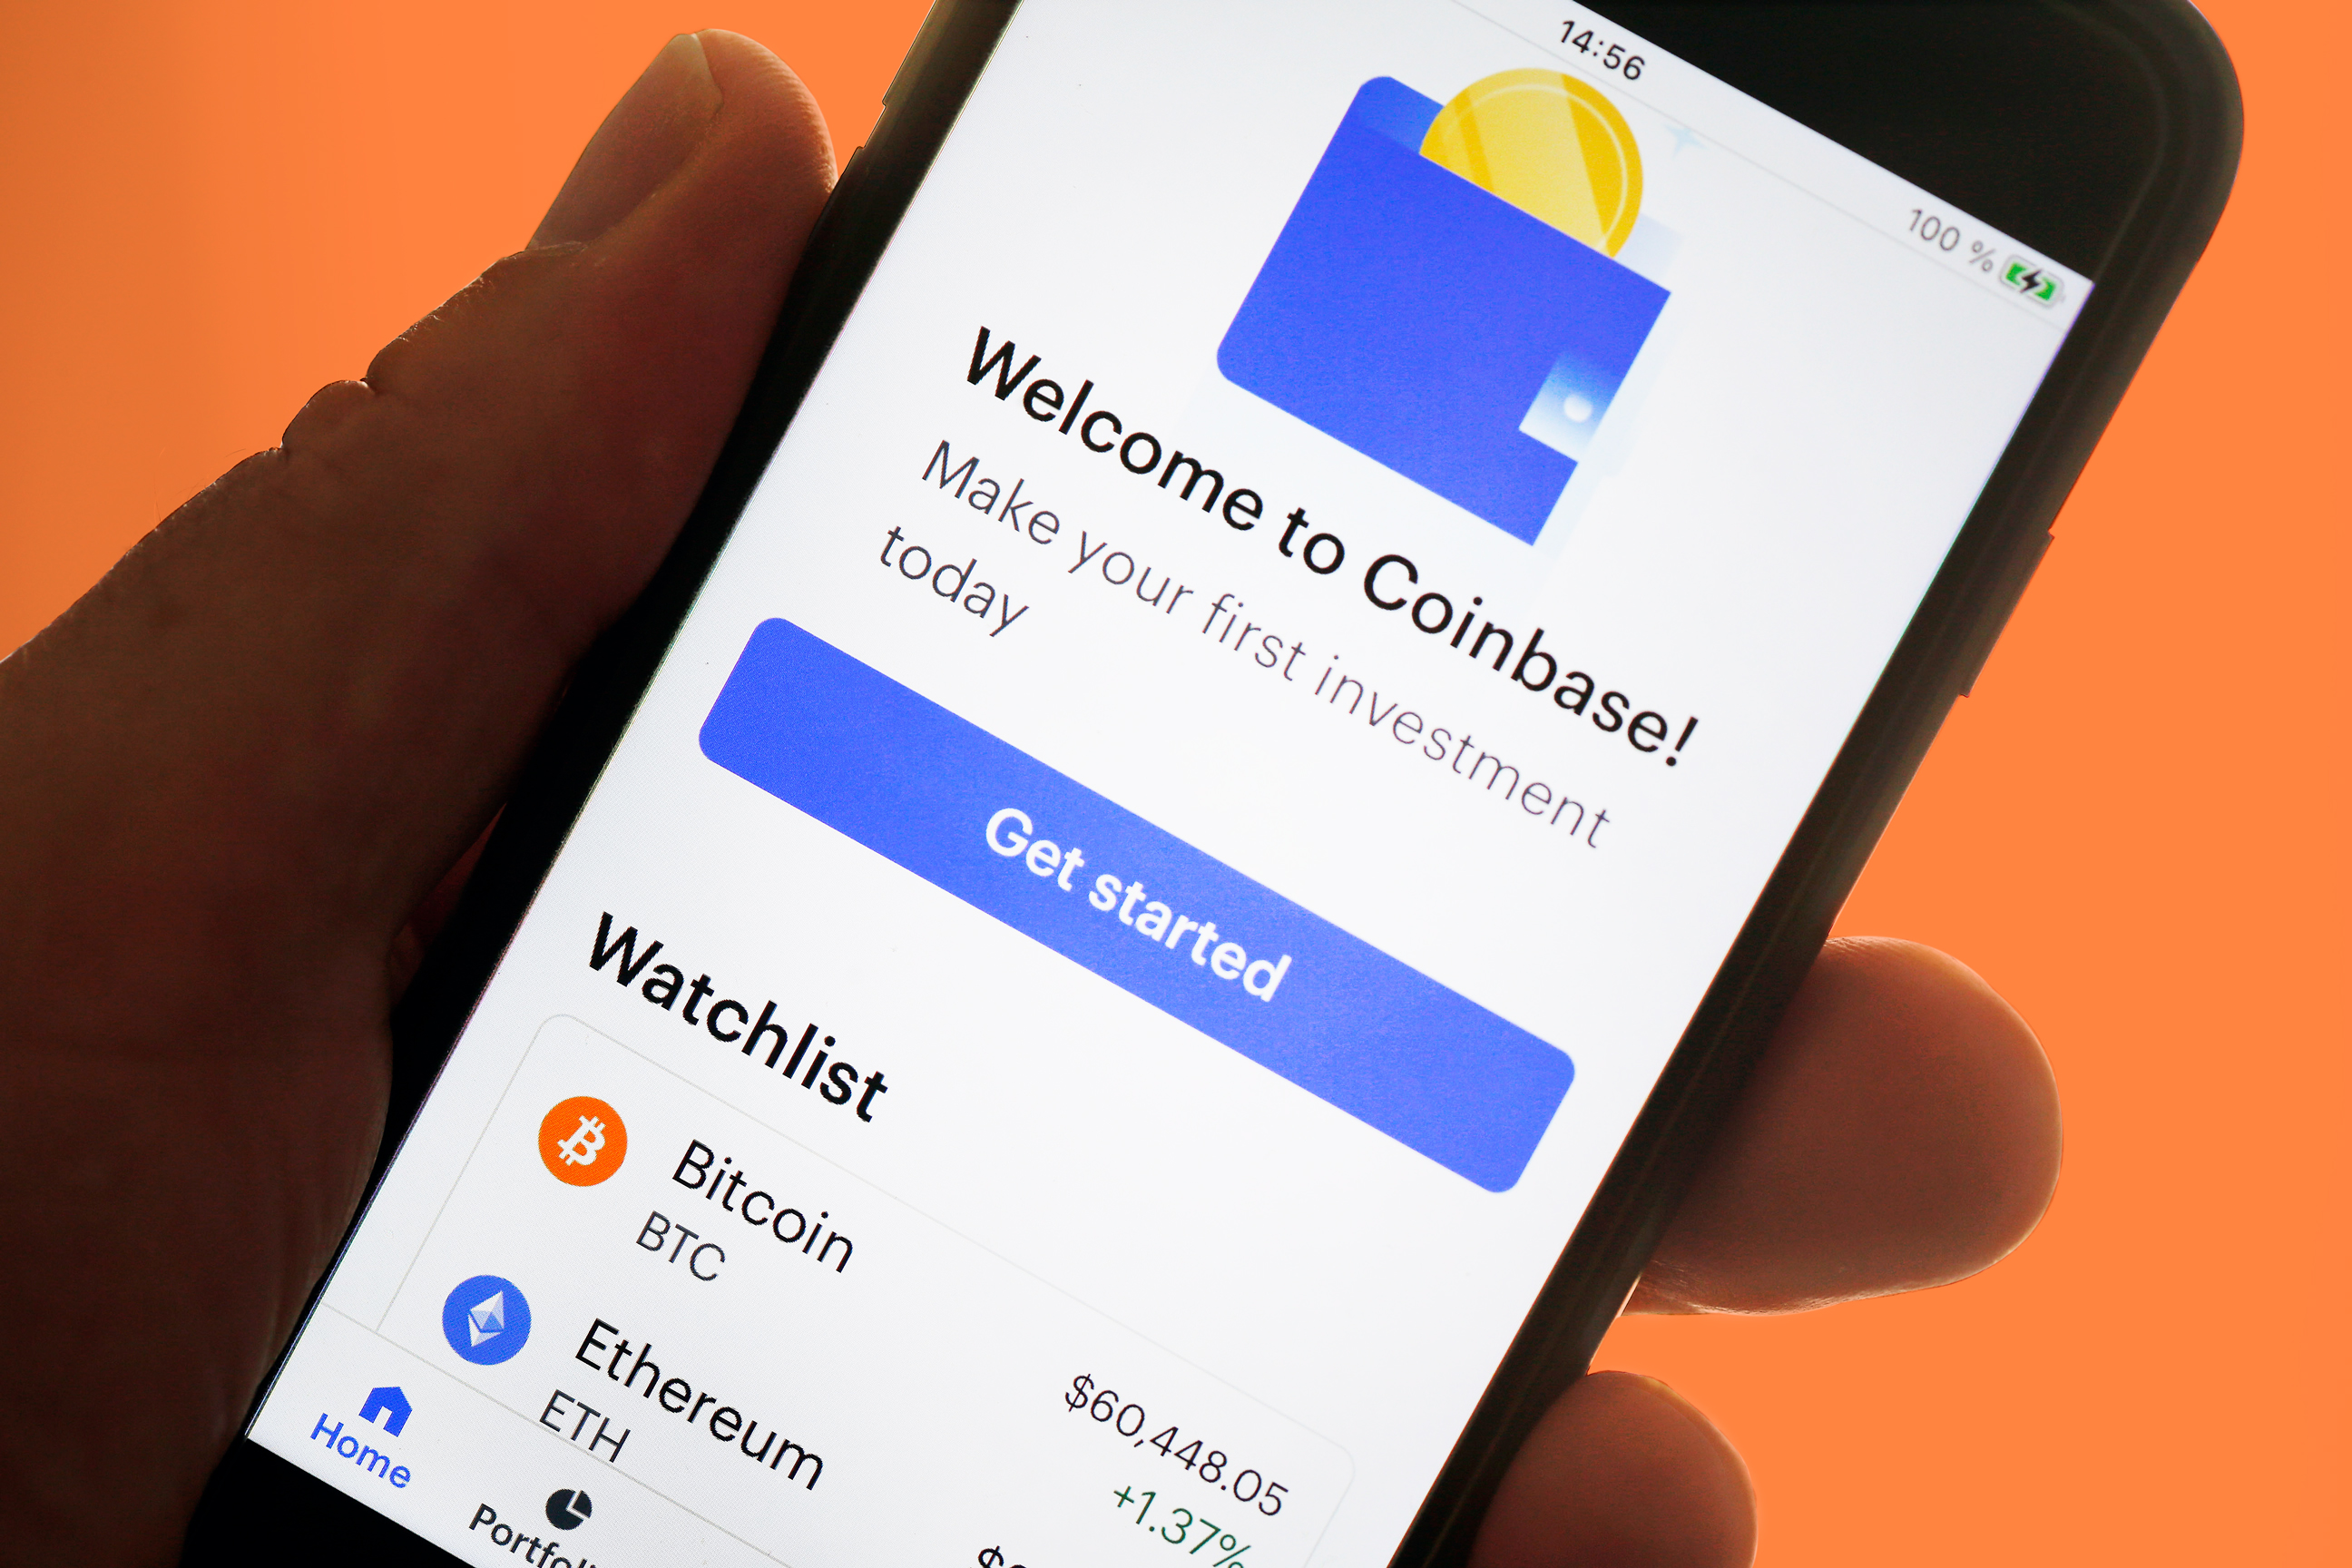 A Trick to Avoid Fees On Coinbase (To Buy Bitcoin or Any Crypto) | Scribe